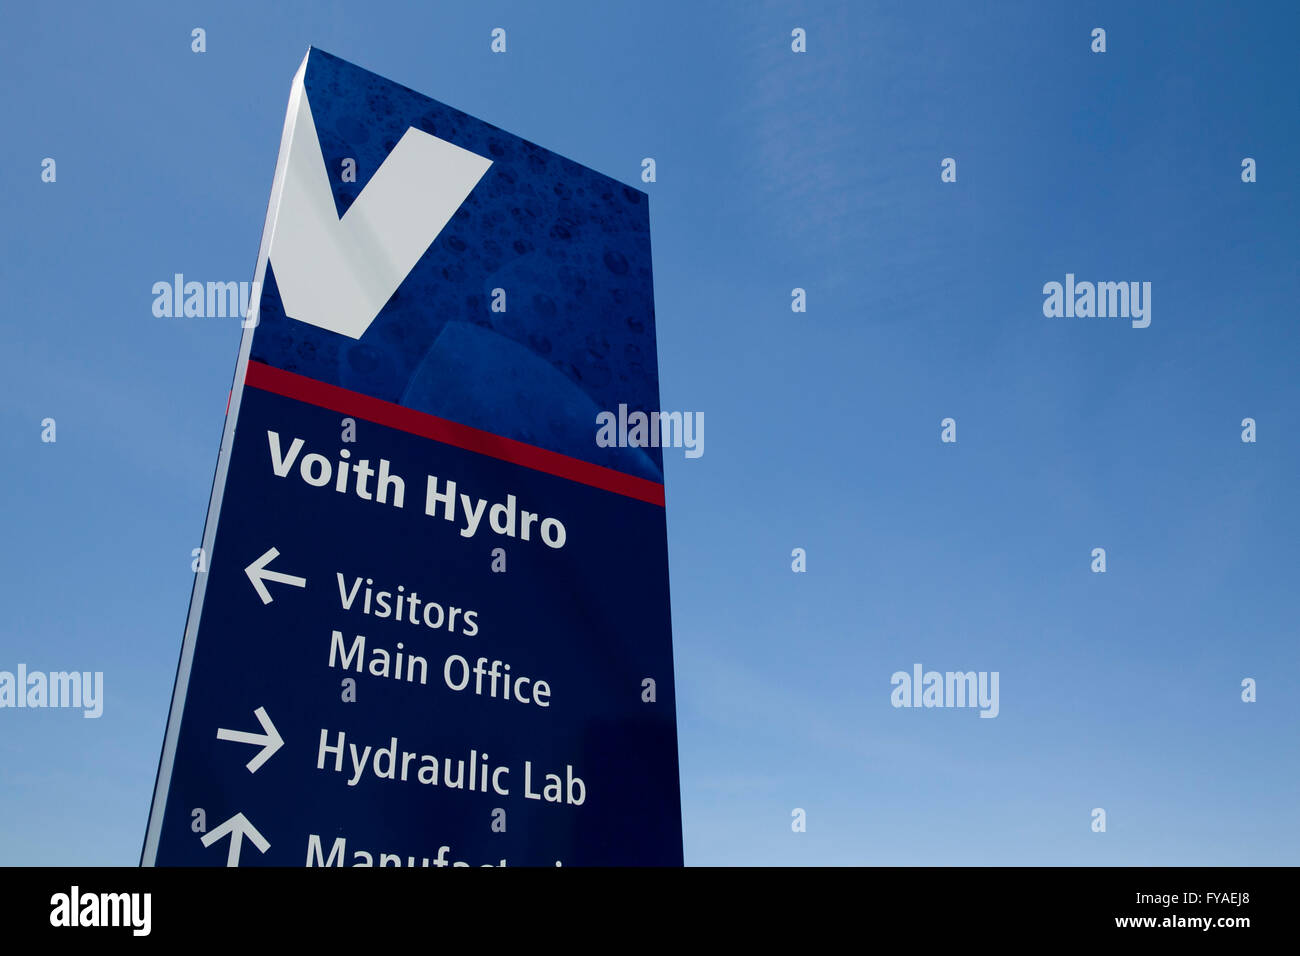 A logo sign outside of the headquarters of Voith Hydro in York, Pennsylvania on April 17, 2016. Stock Photo